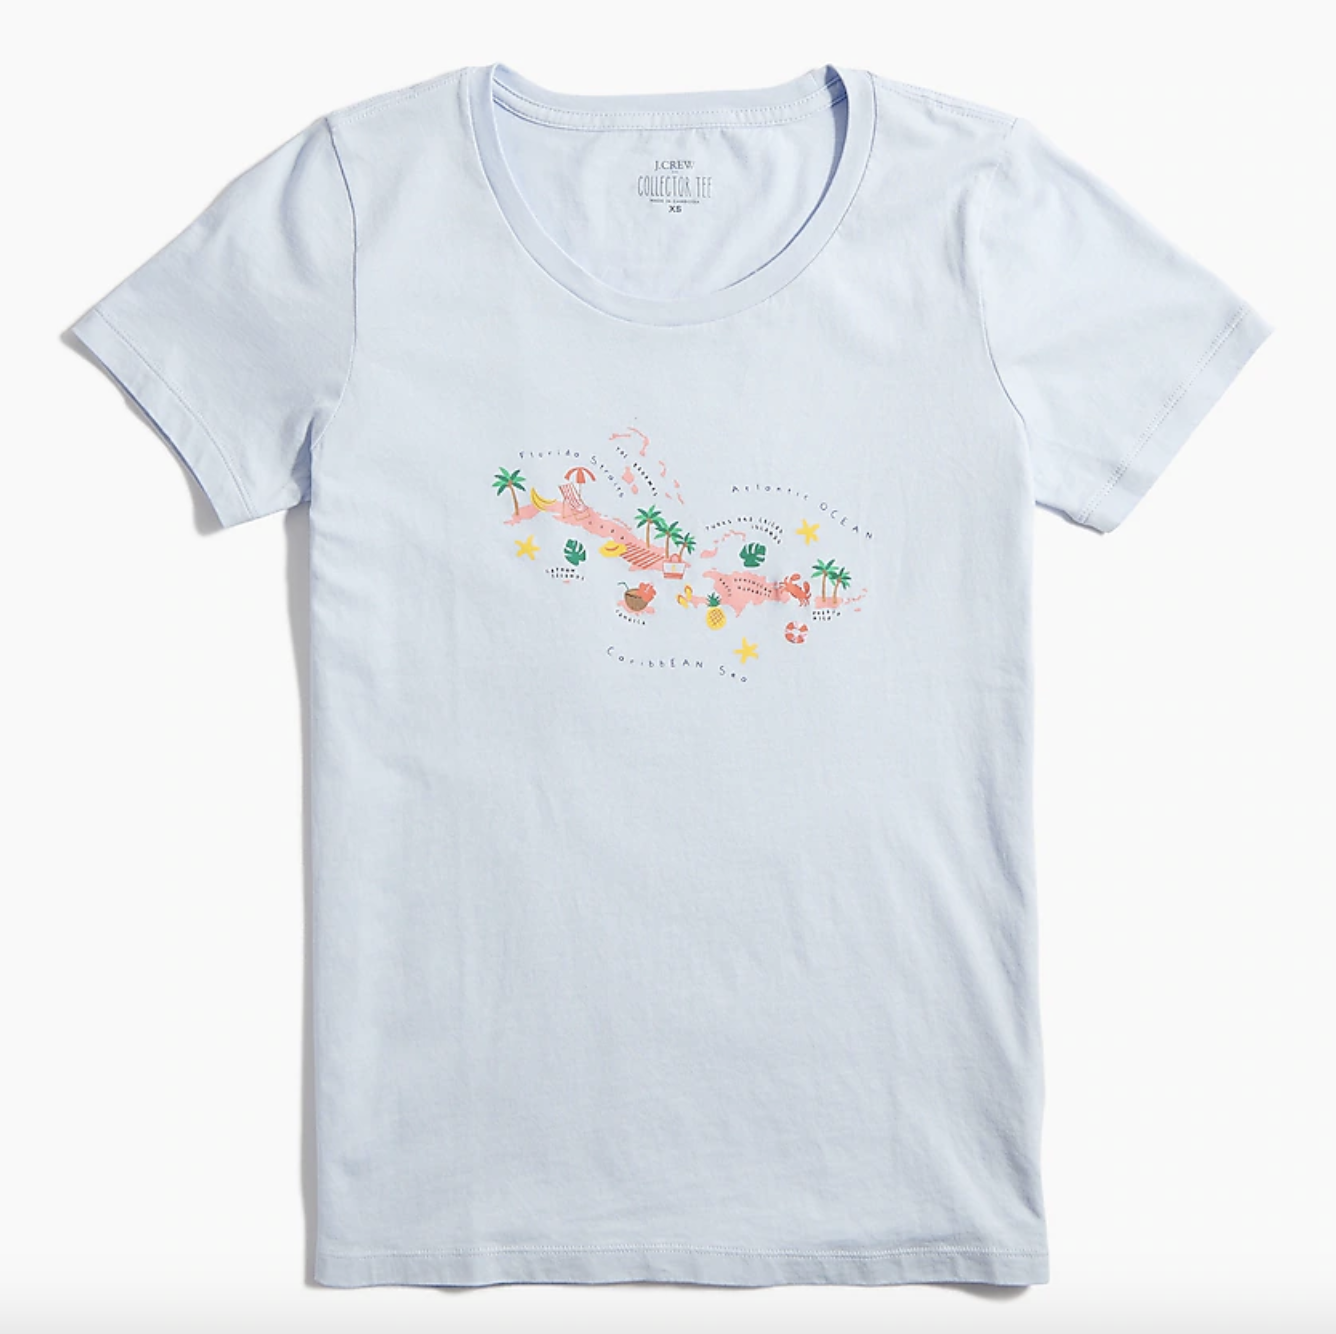 the pale blue tee, which has a cute illustrated map of the Caribbean in the center